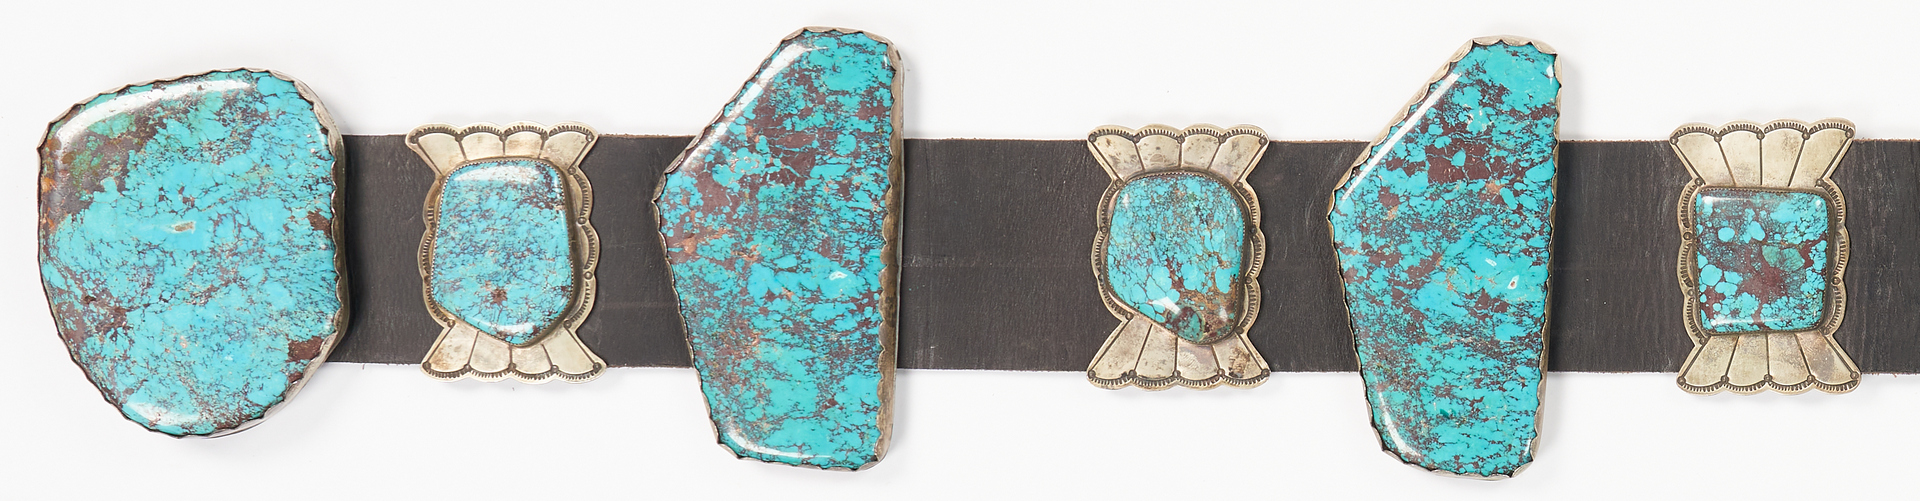 Lot 632: Native American Sterling Silver, Large Turquoise Stone Concho Belt